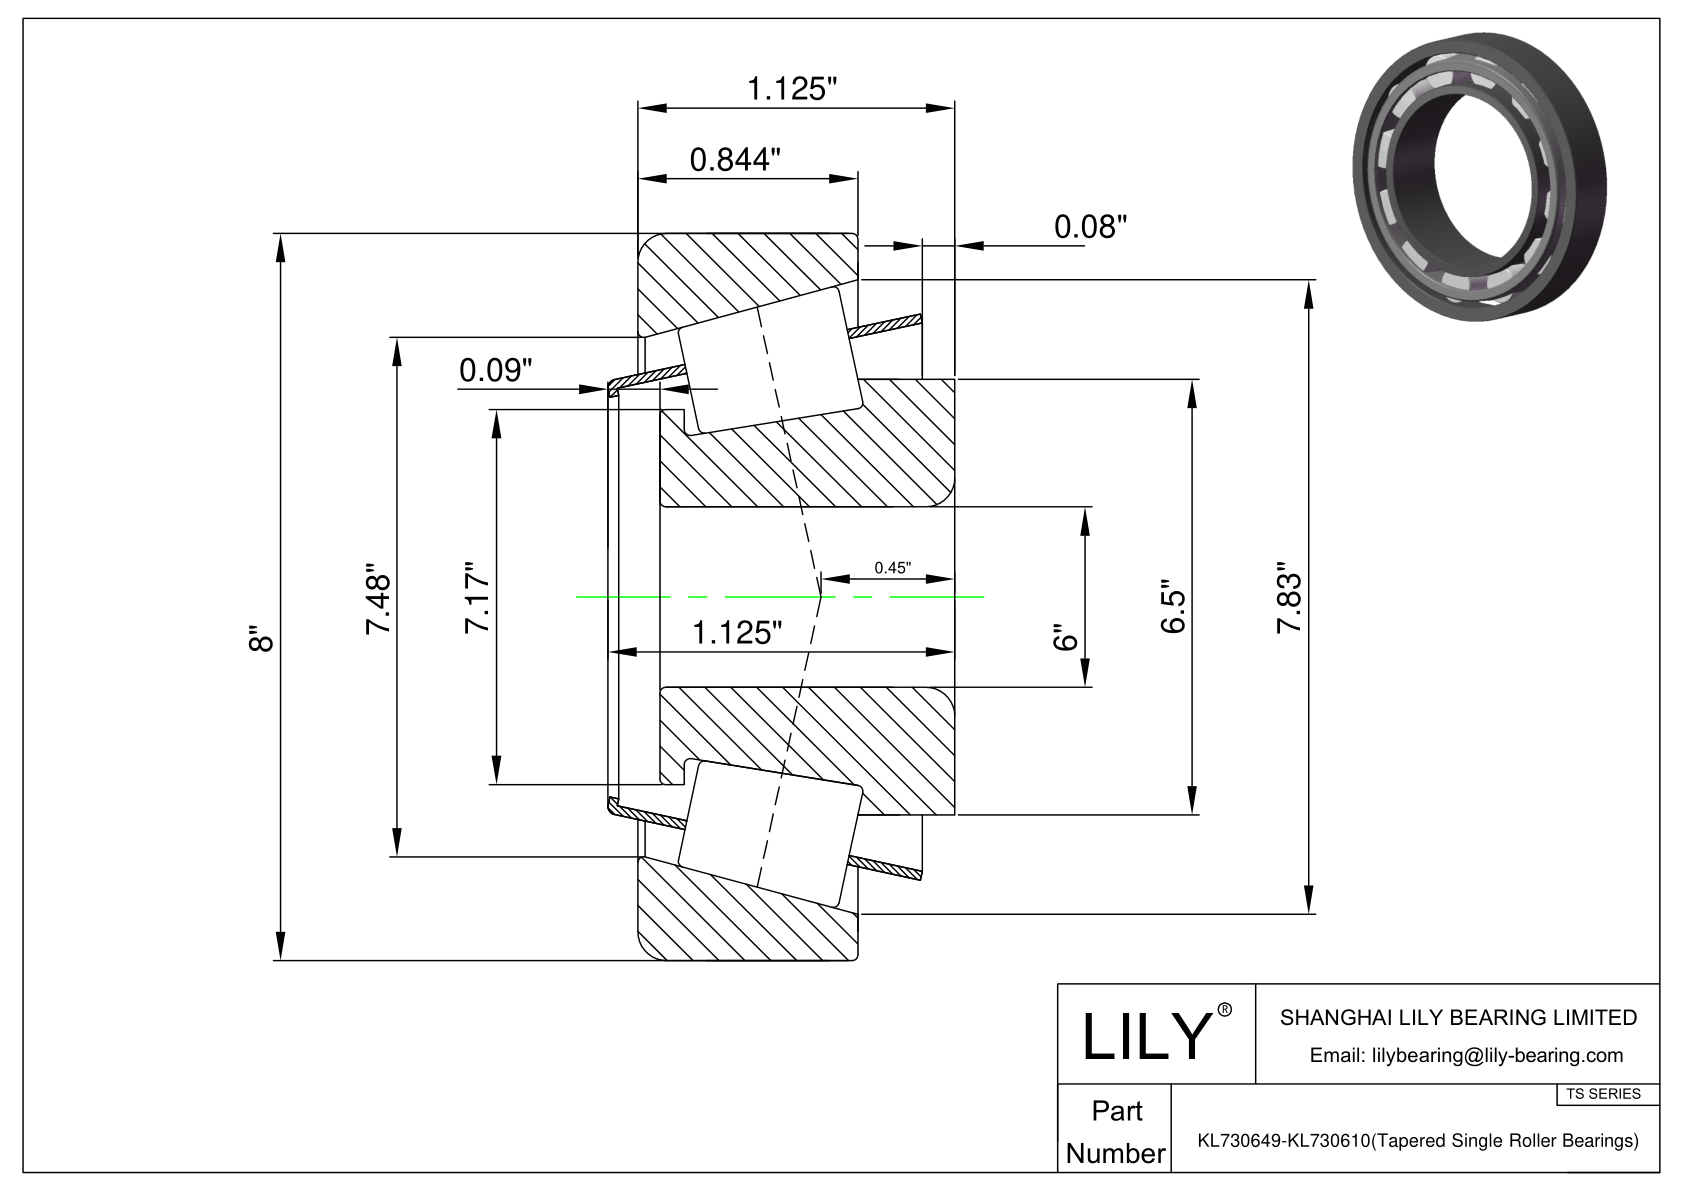 KL730649-KL730610 TS (Tapered Single Roller Bearings) (Imperial) cad drawing